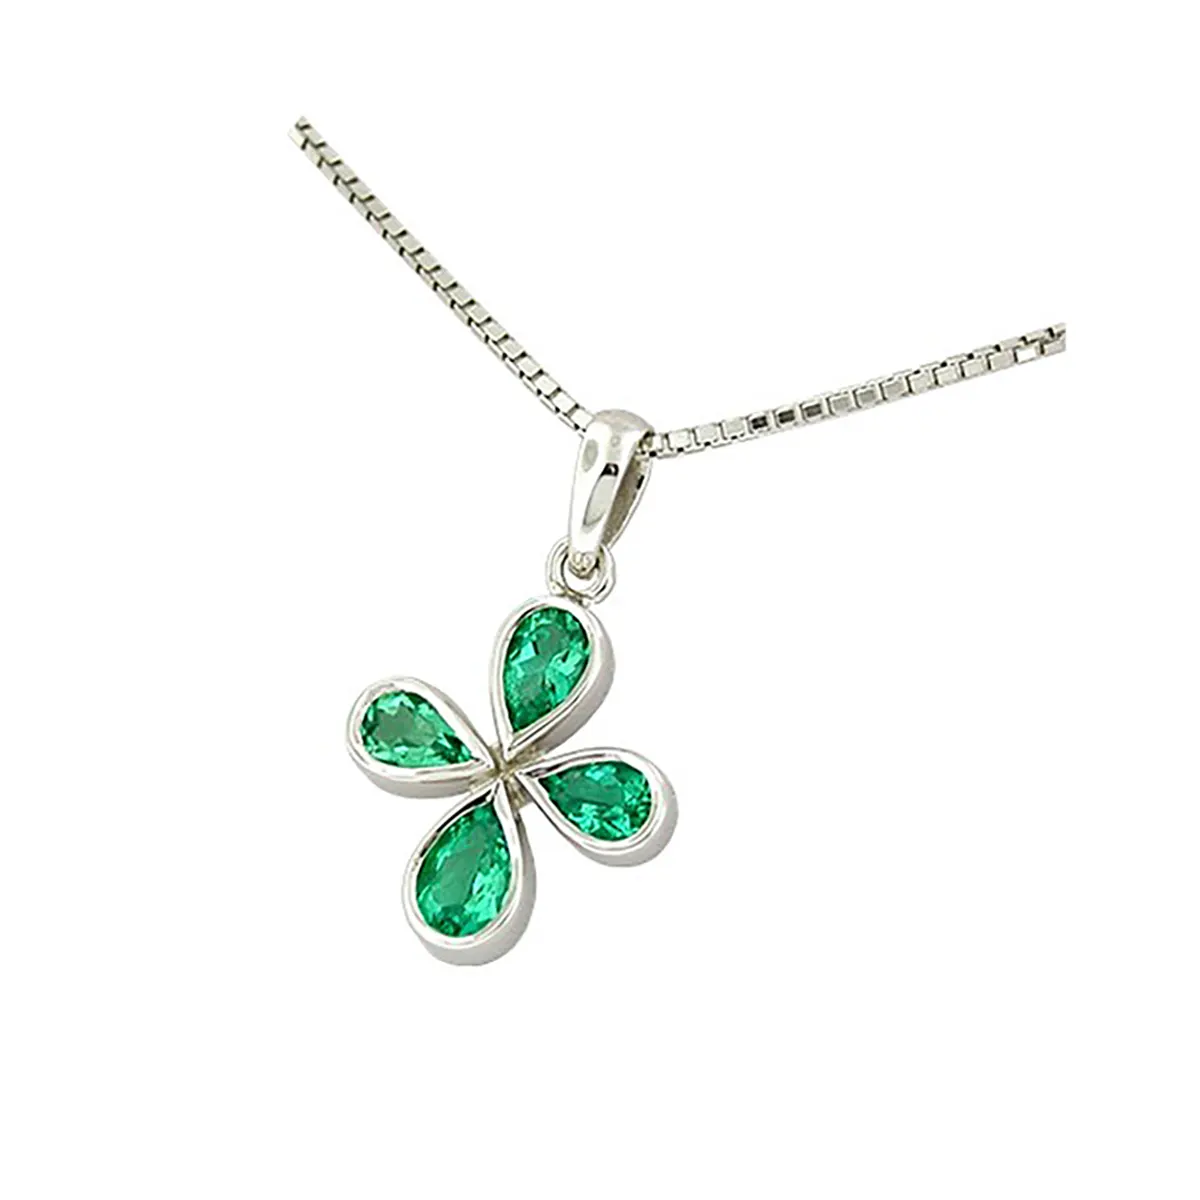 Clover shape green emerald pendant necklace with 4 pear cuts natural Colombian emeralds in 1.10 Ct. t.w. in 18K white gold bezel set